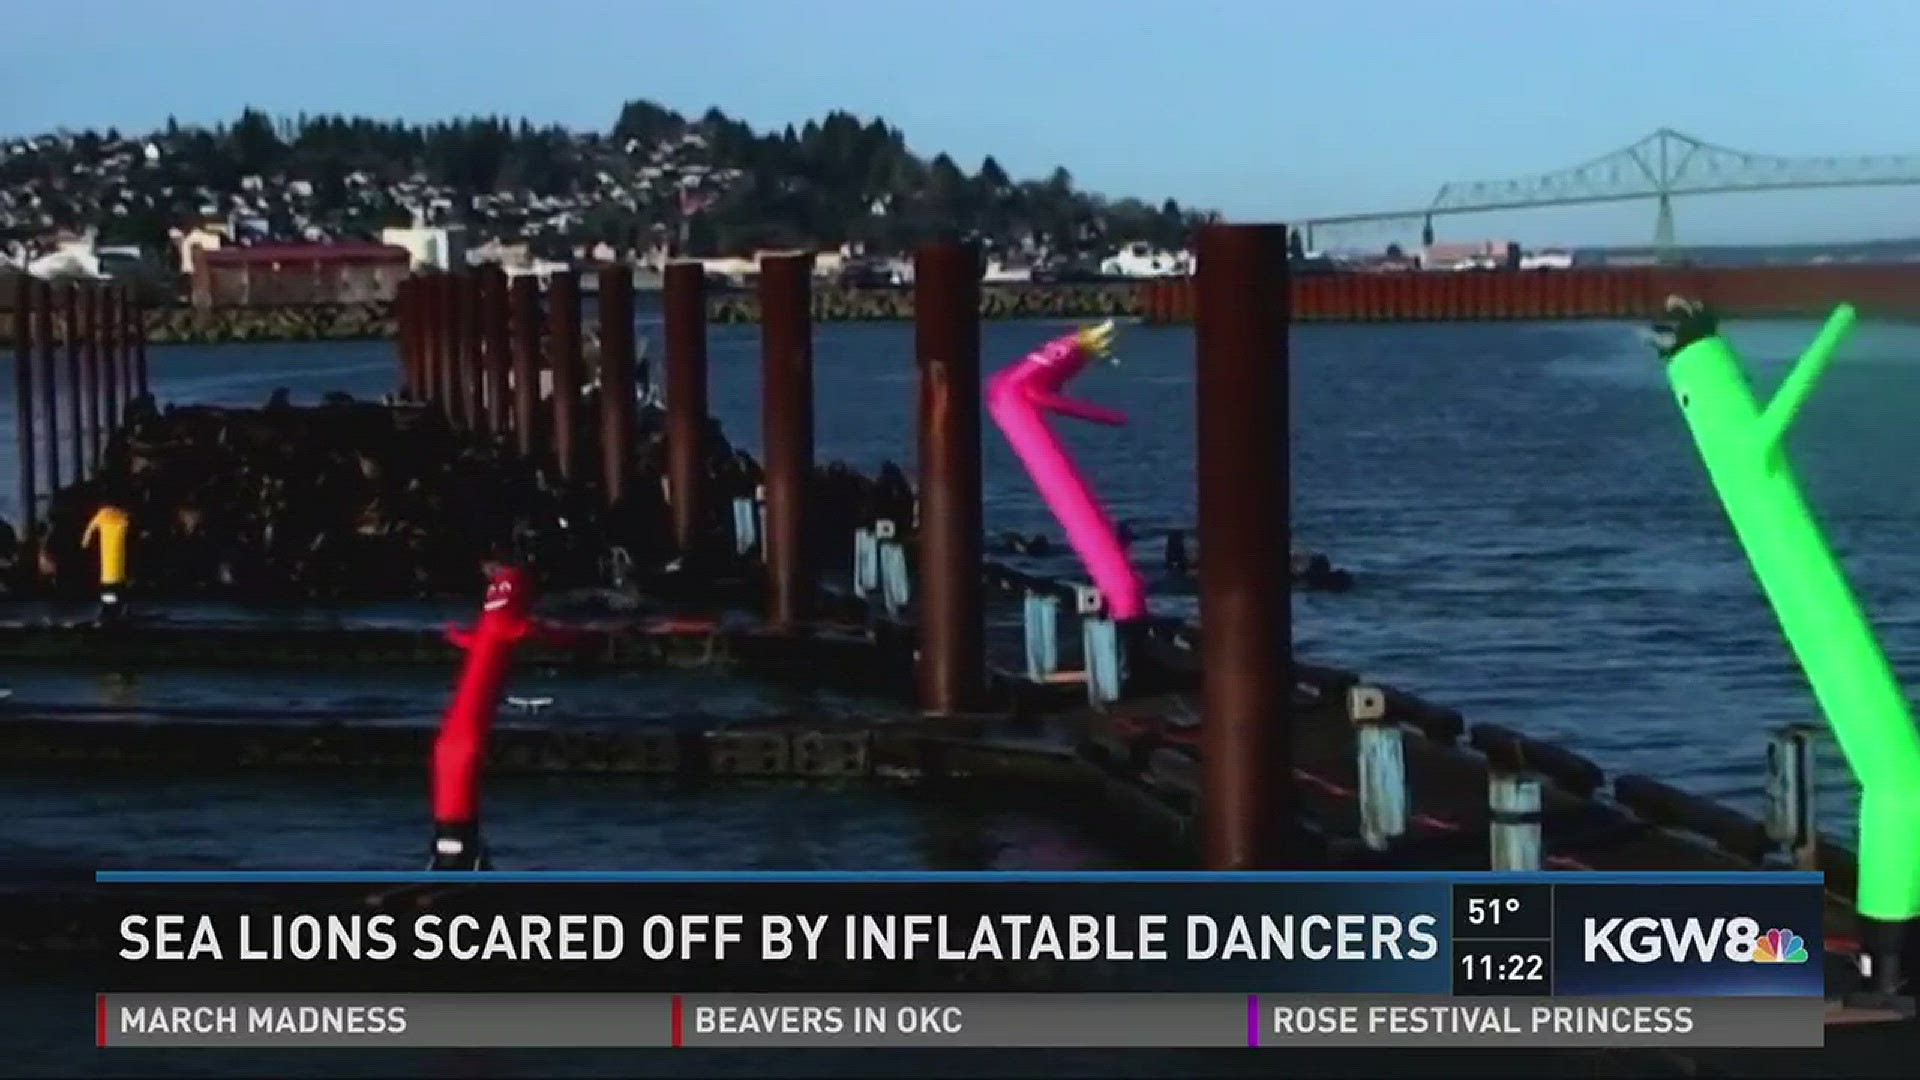 Sea lions scared off by inflatable dancers